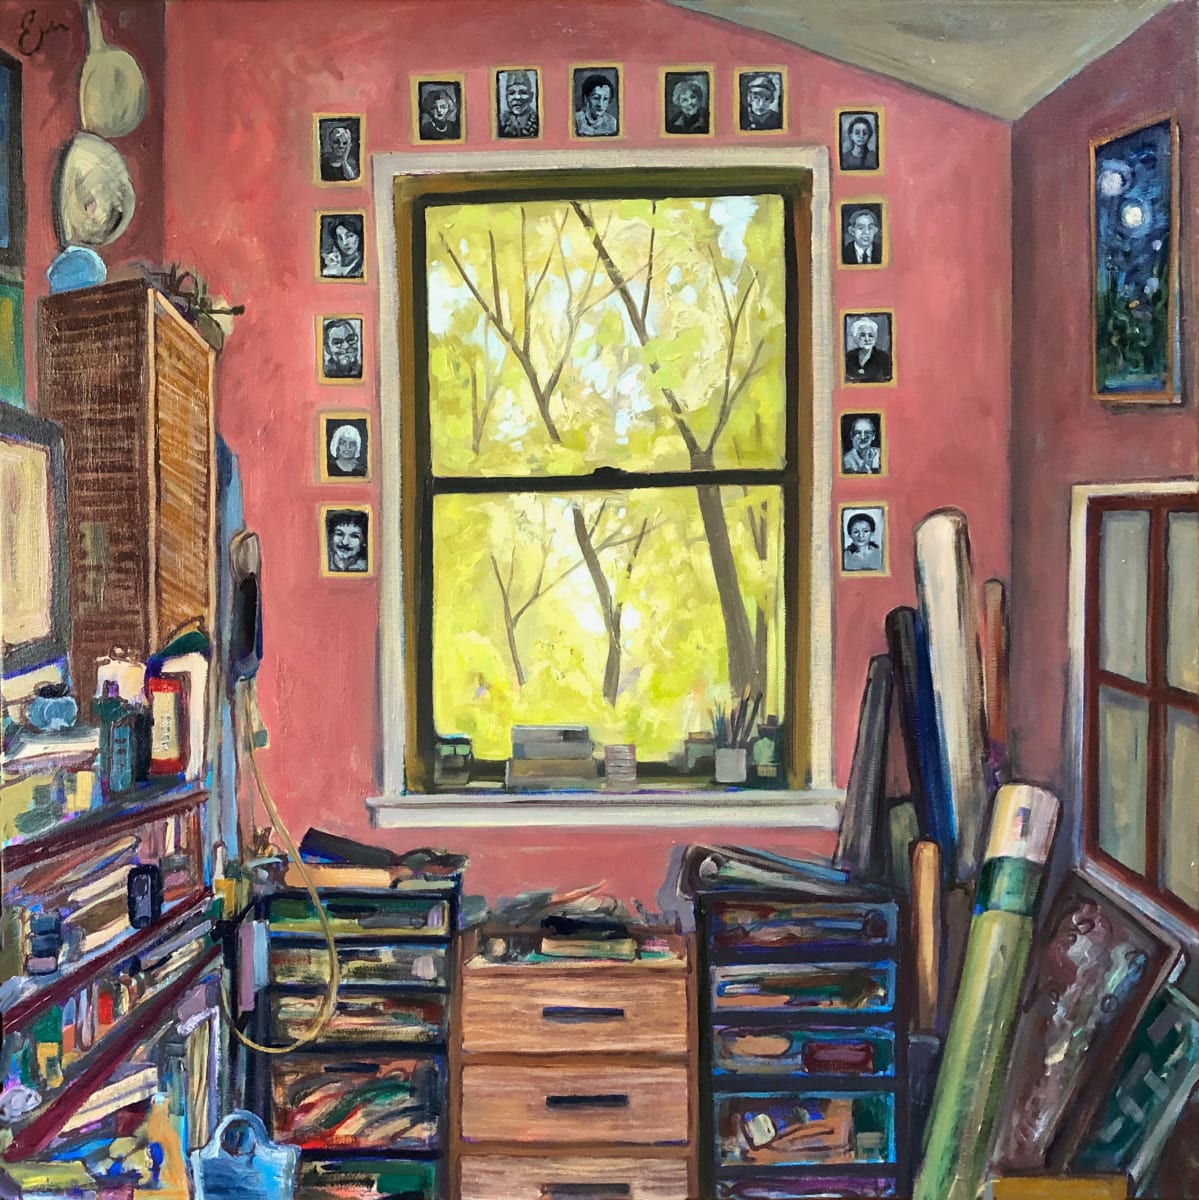 Corner in Studio  Image: 
I decided to commemorate special people to me in this painting of a corner that took me ages to organize. A tribute.